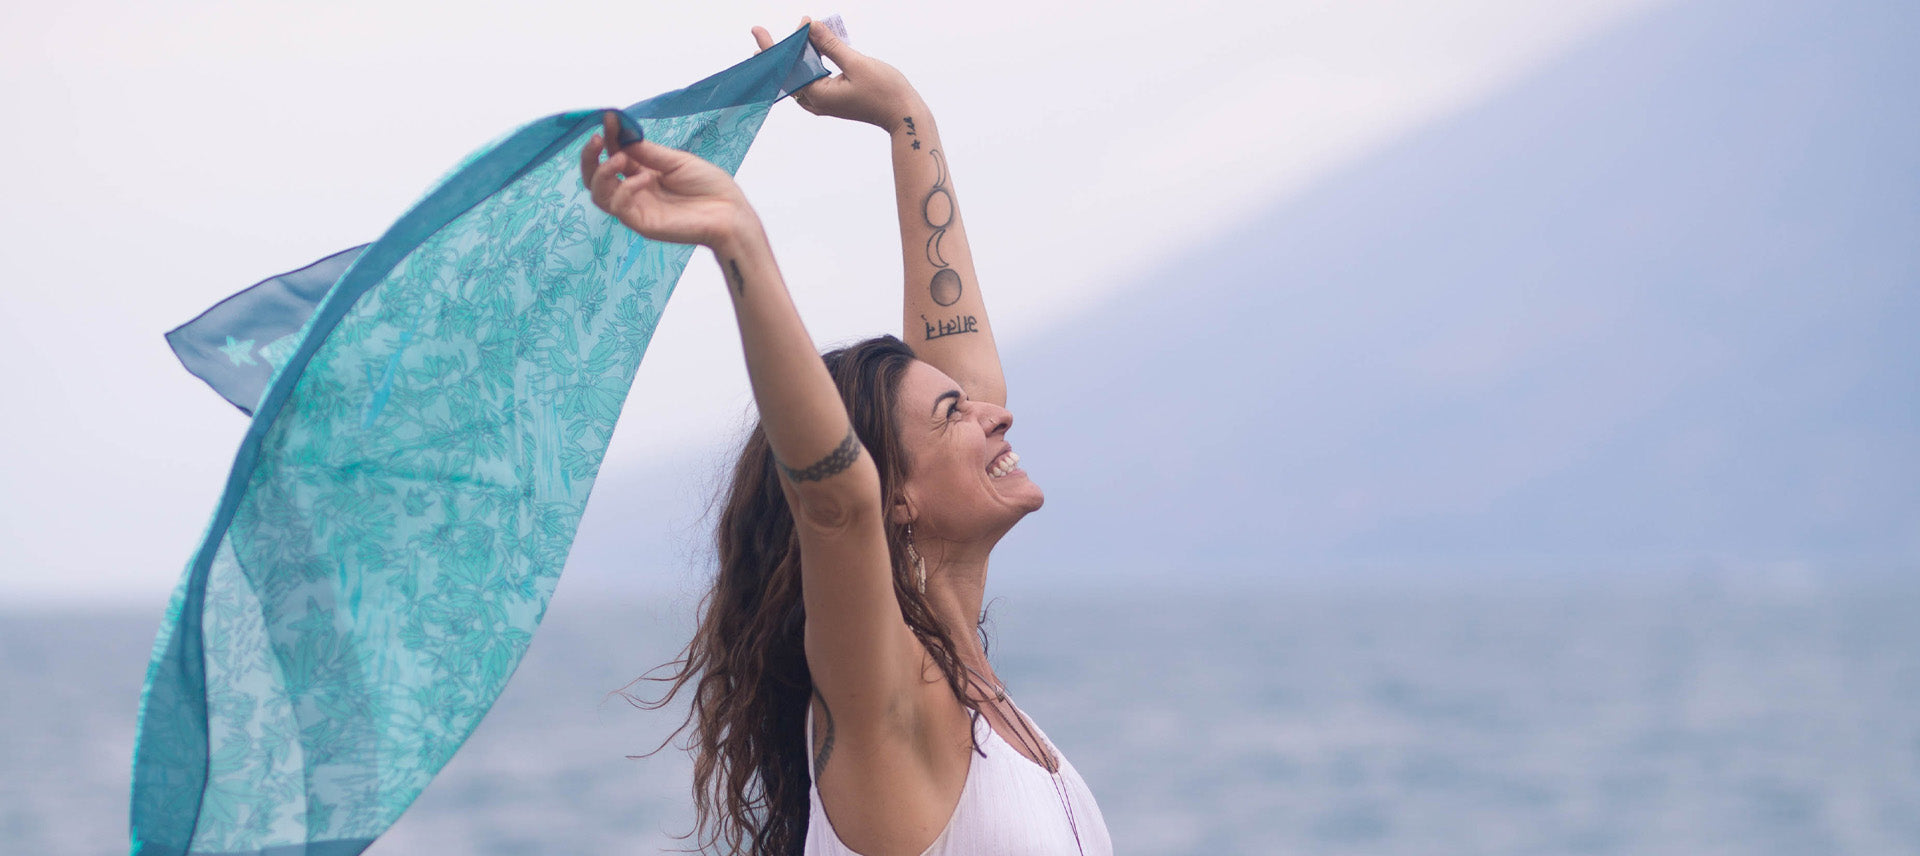 Woman with silk scarf blowing in the wind. Scarf is printed in blues with illustrated images of the mangrove ecosystem.